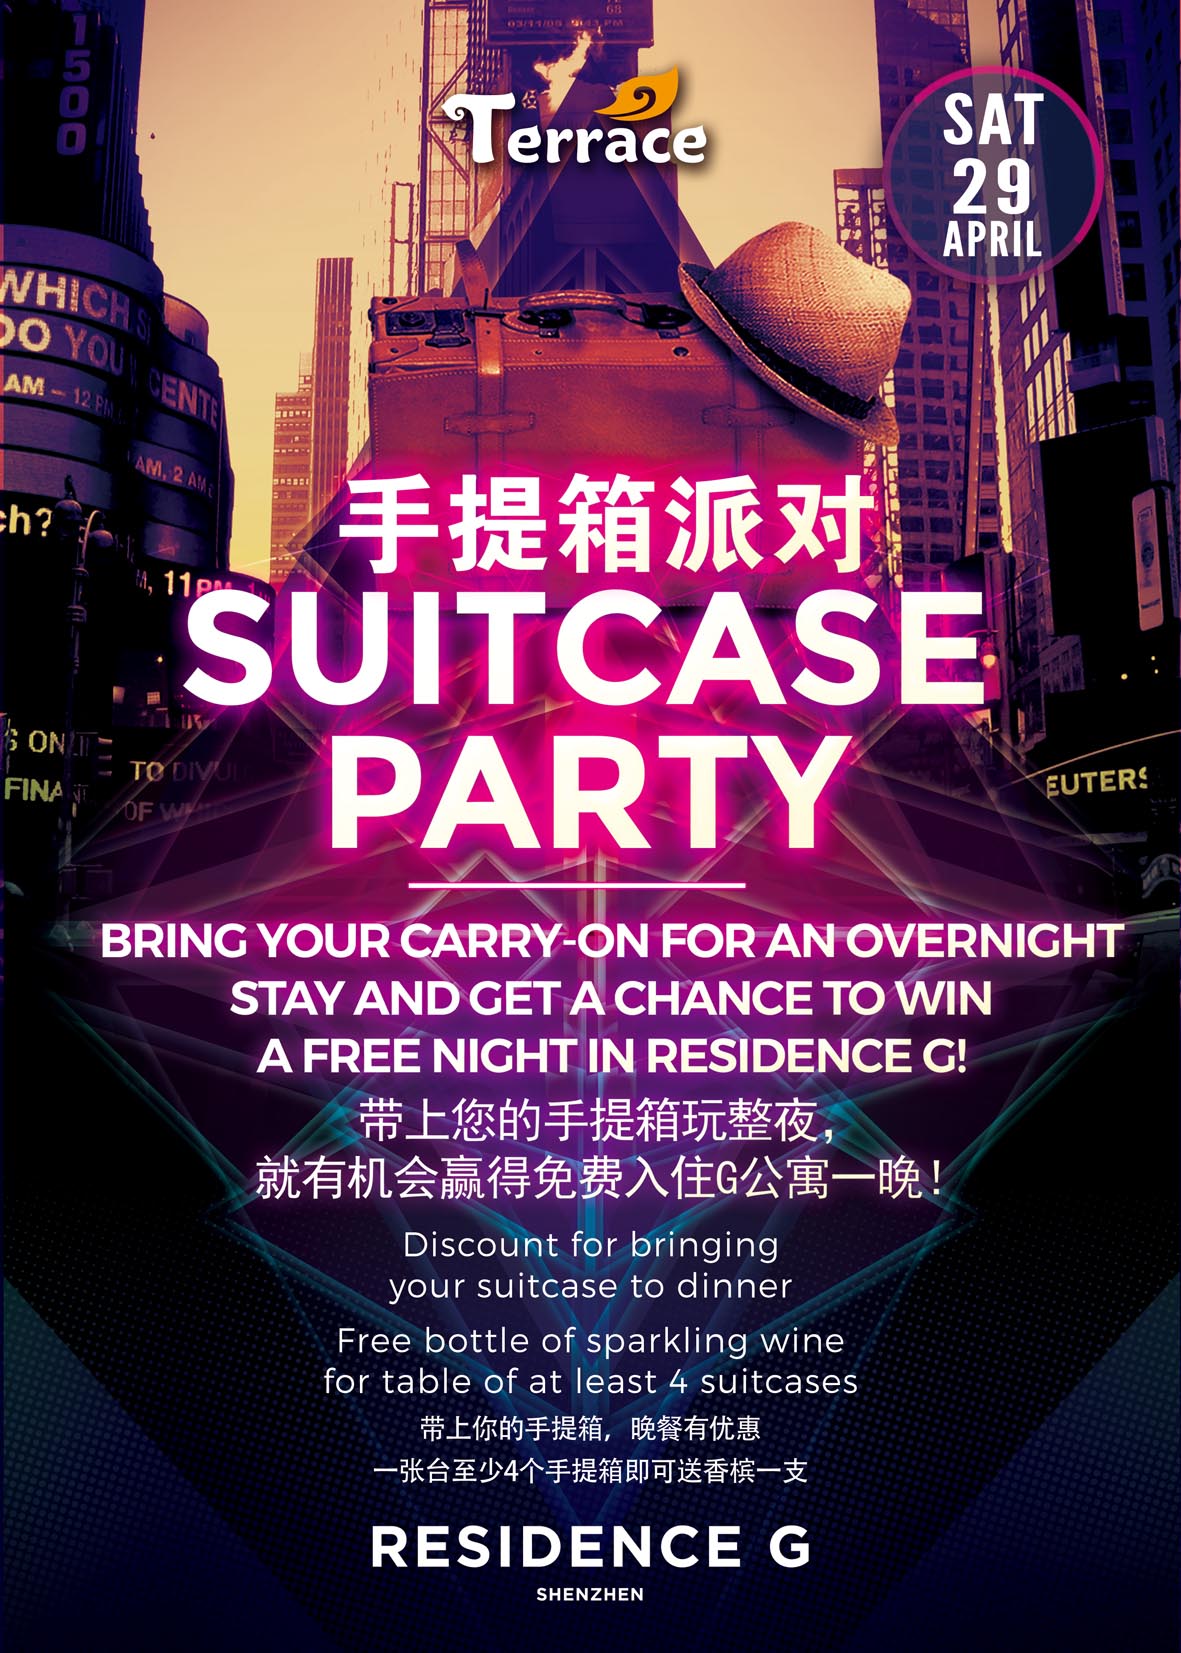 Suitcase-Party2.jpg